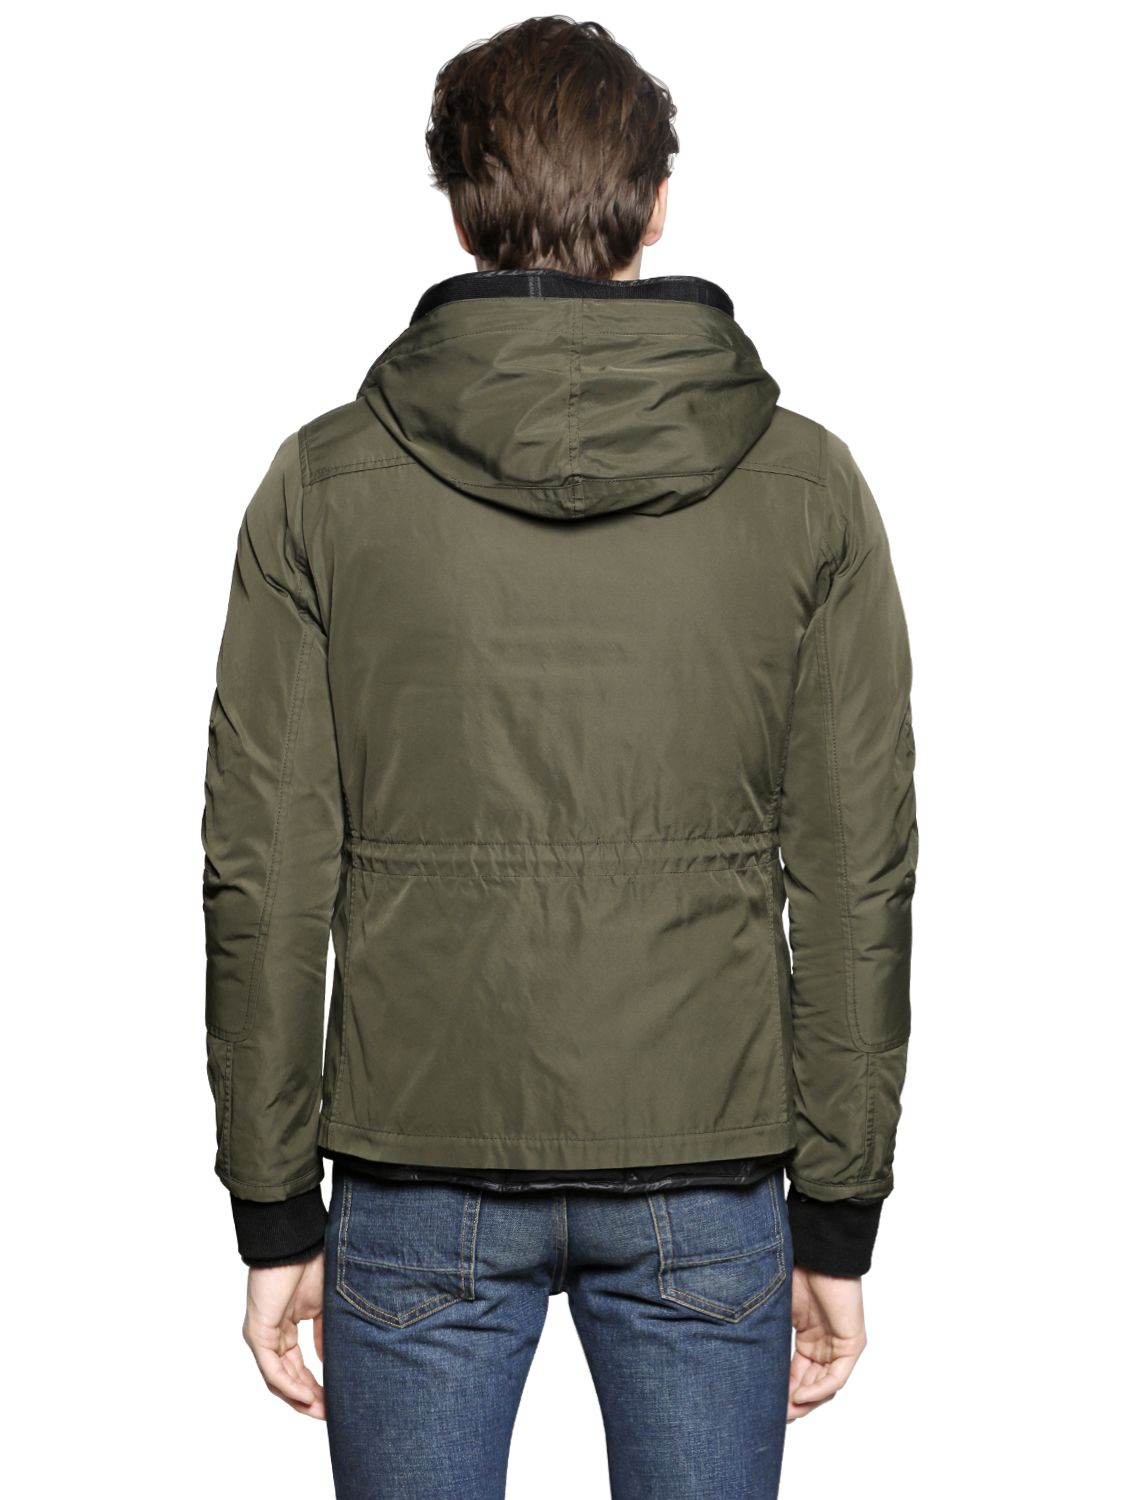 Golden Goose Deluxe Brand Nylon Canvas Parka & Down Jacket in Military ...